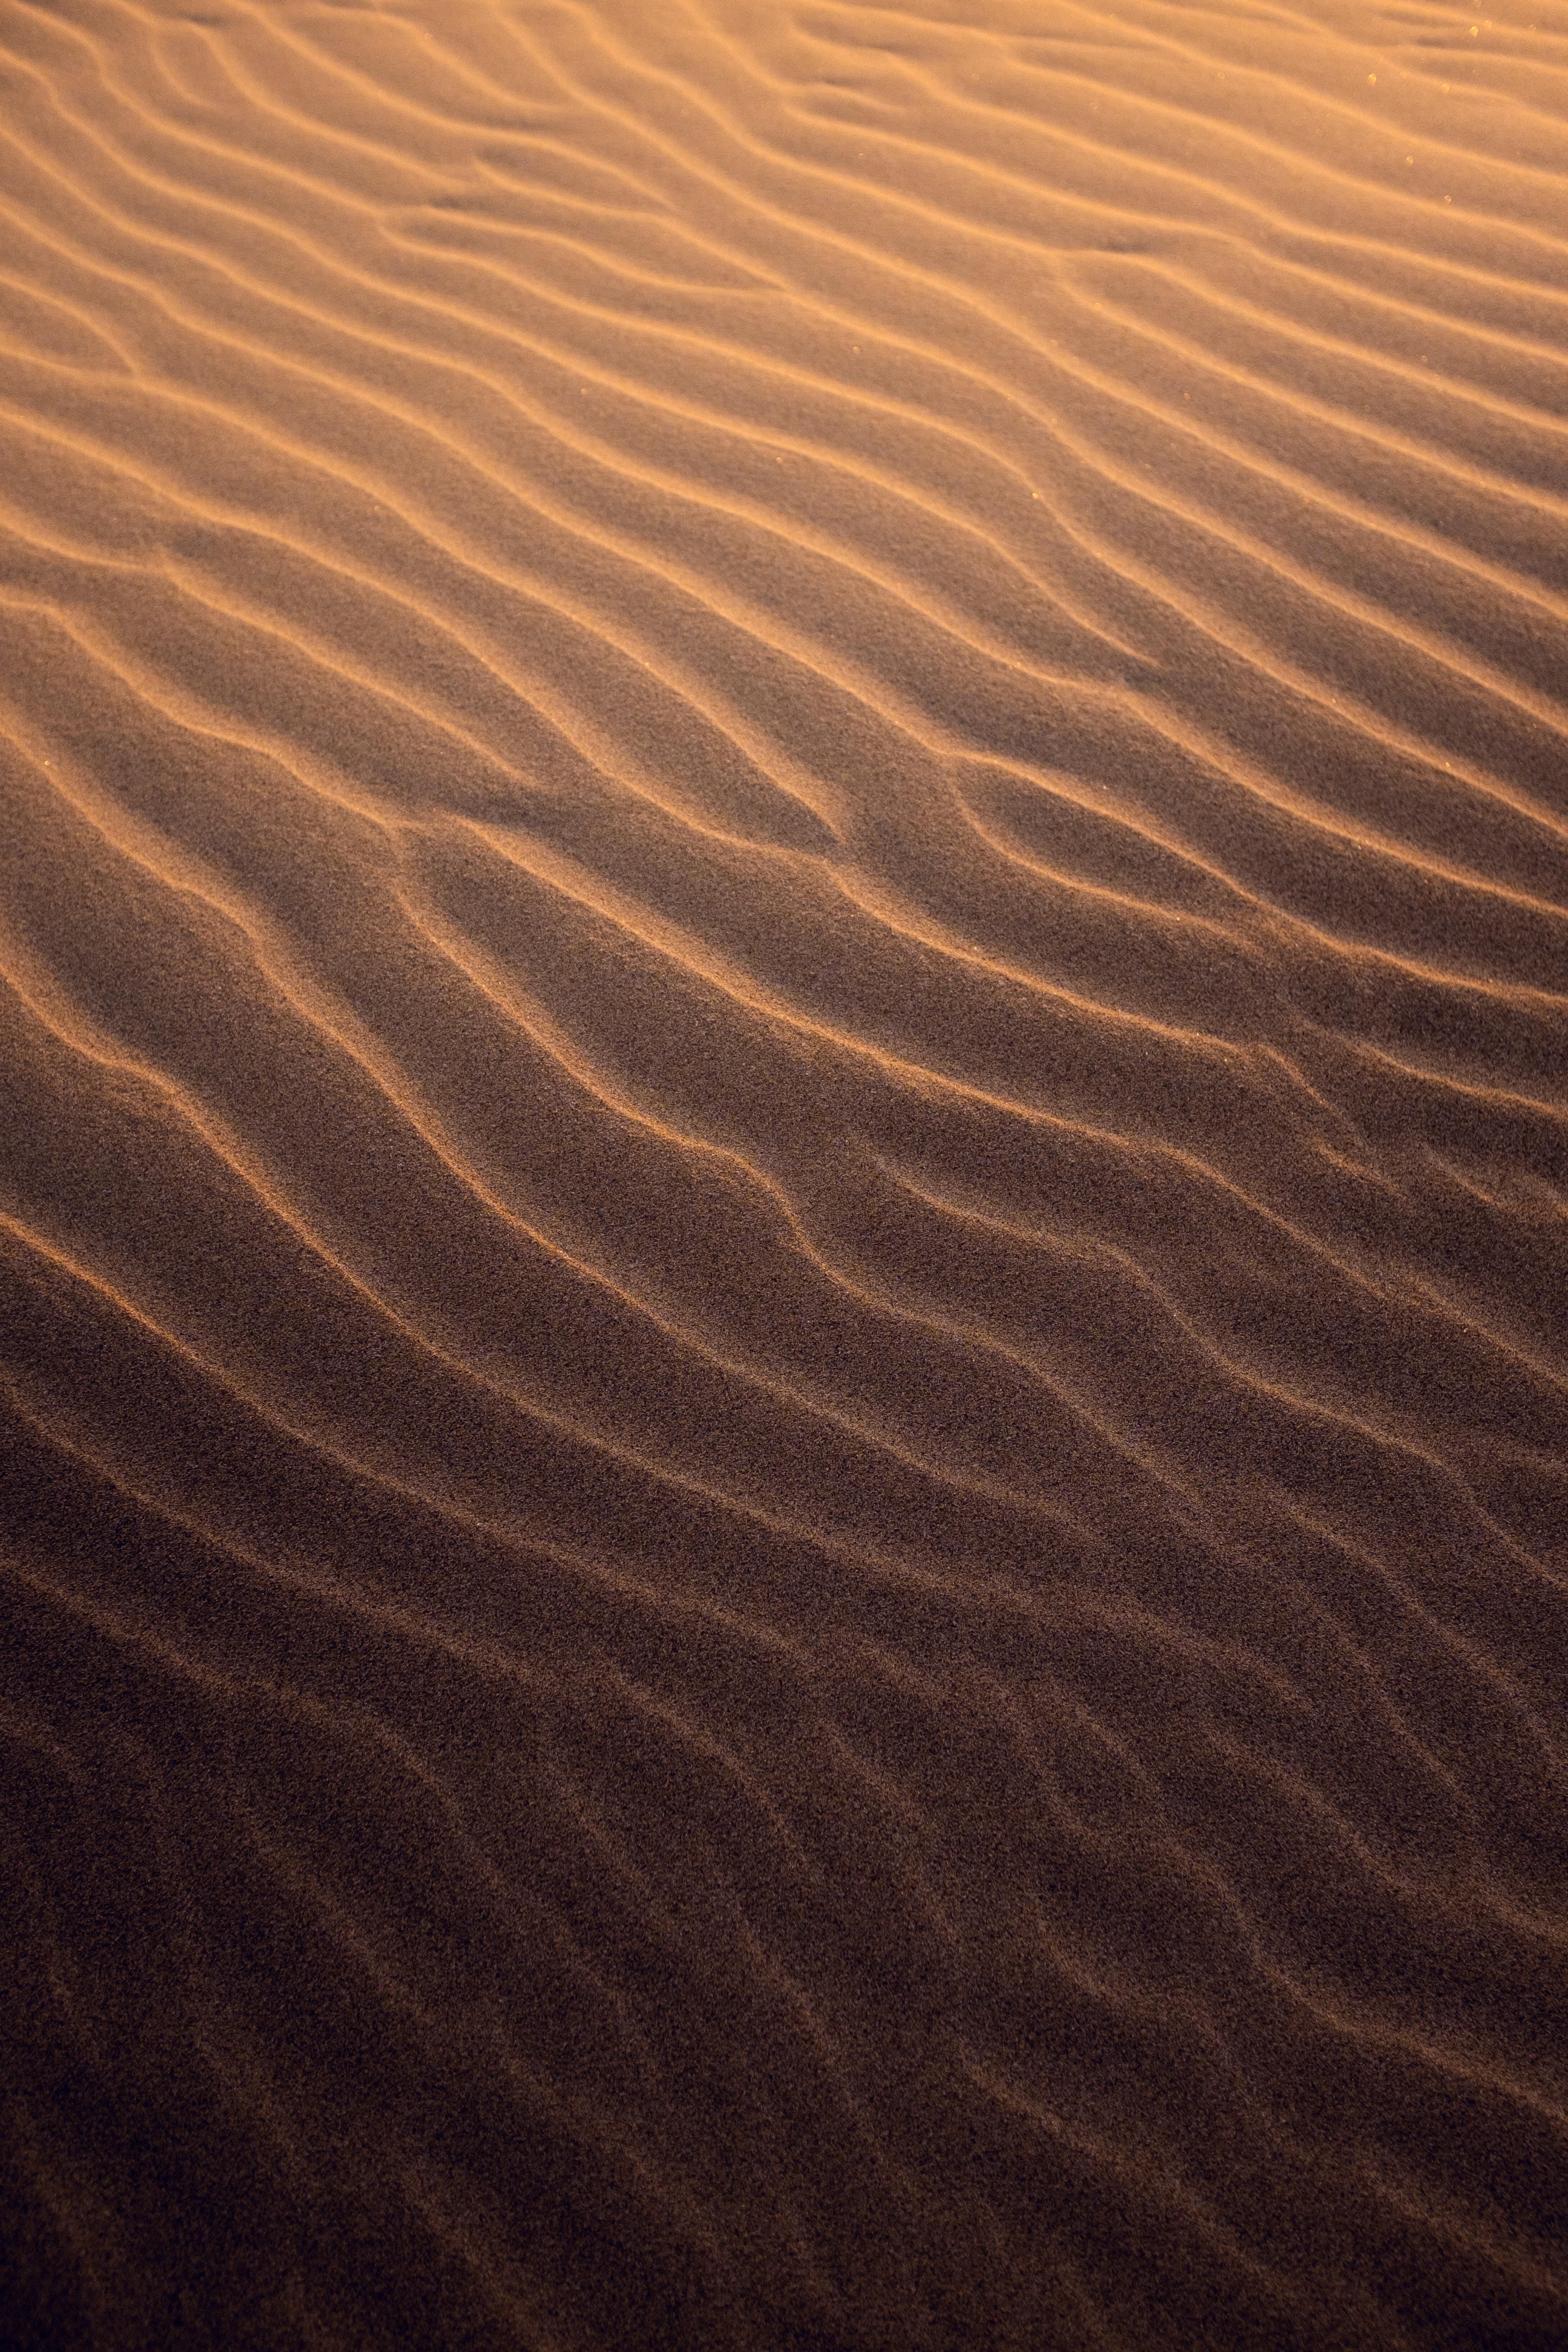 Download PC Wallpaper textures, waves, sand, ripples, ripple, texture, brown